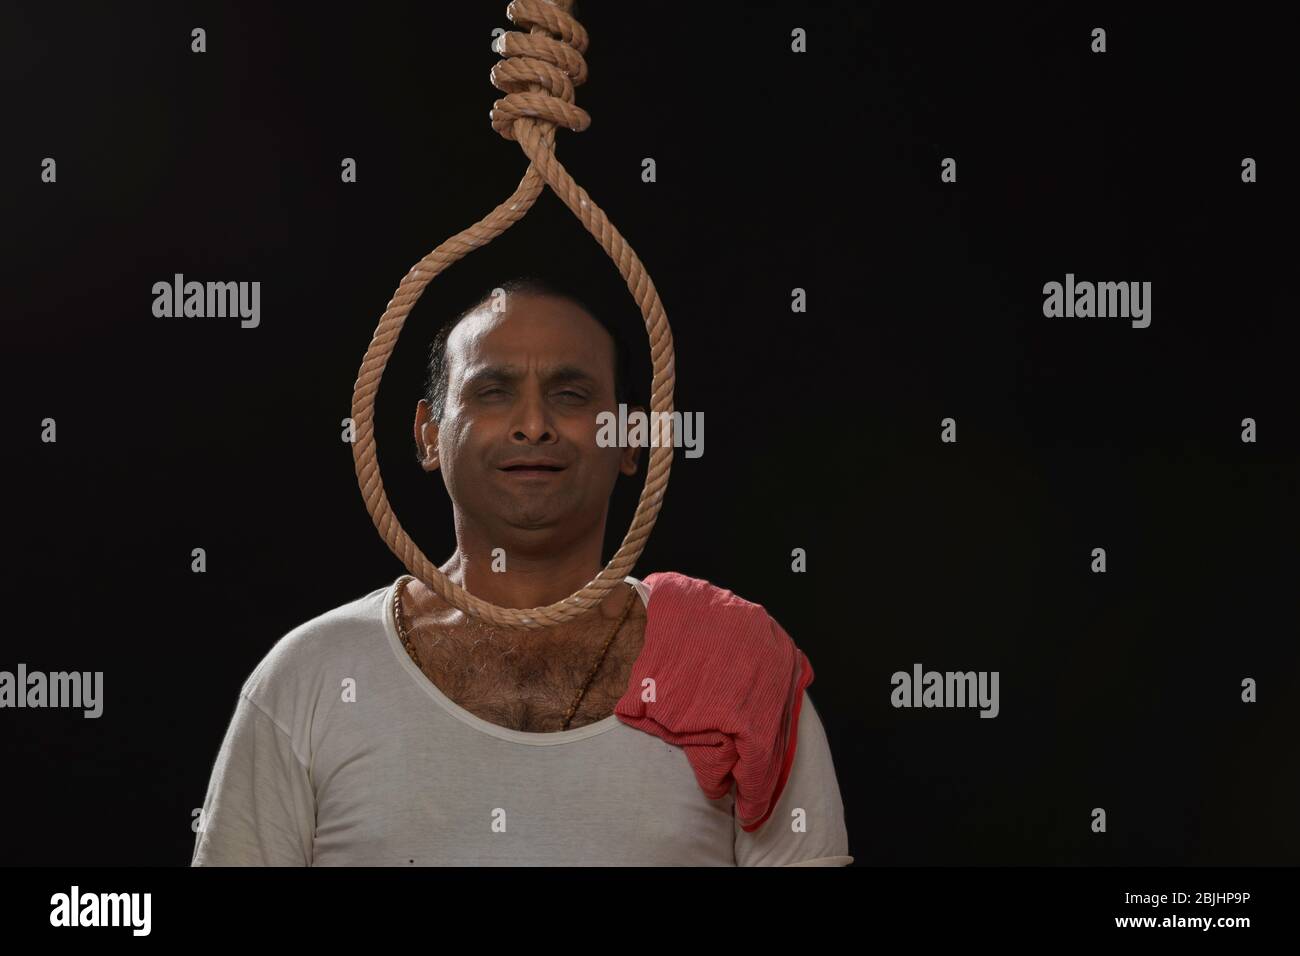 Indian man suicide ready for hanging punishment Stock Photo